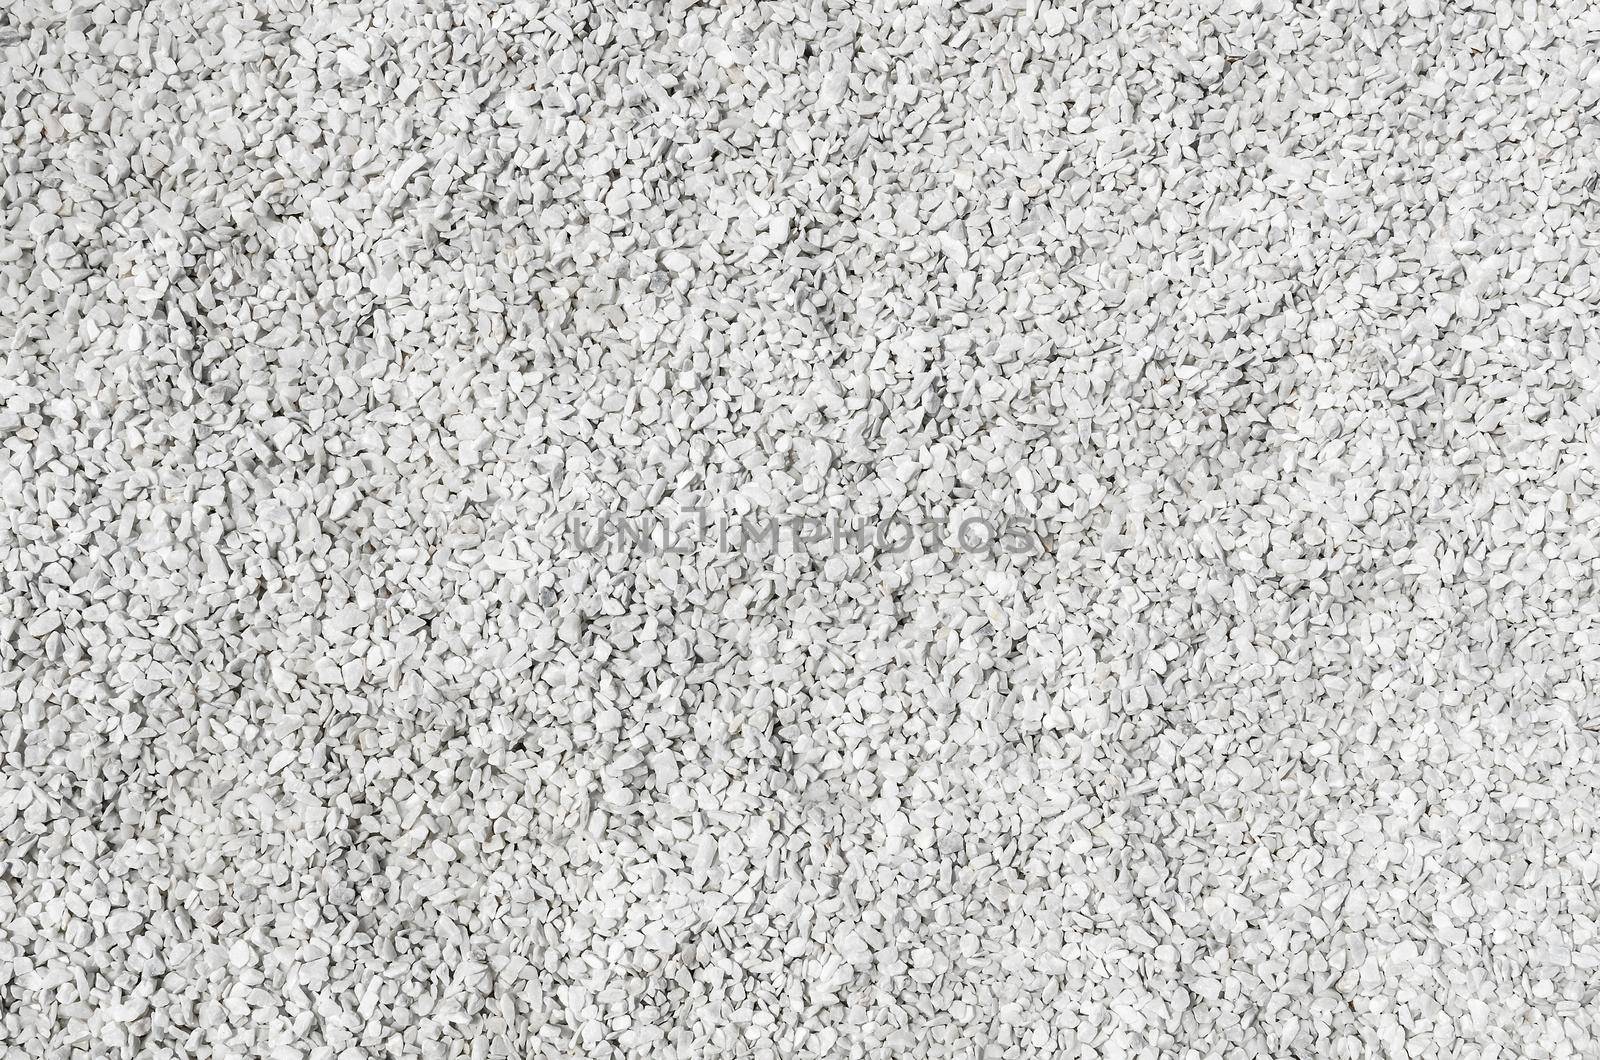 White stone gravel texture for your background